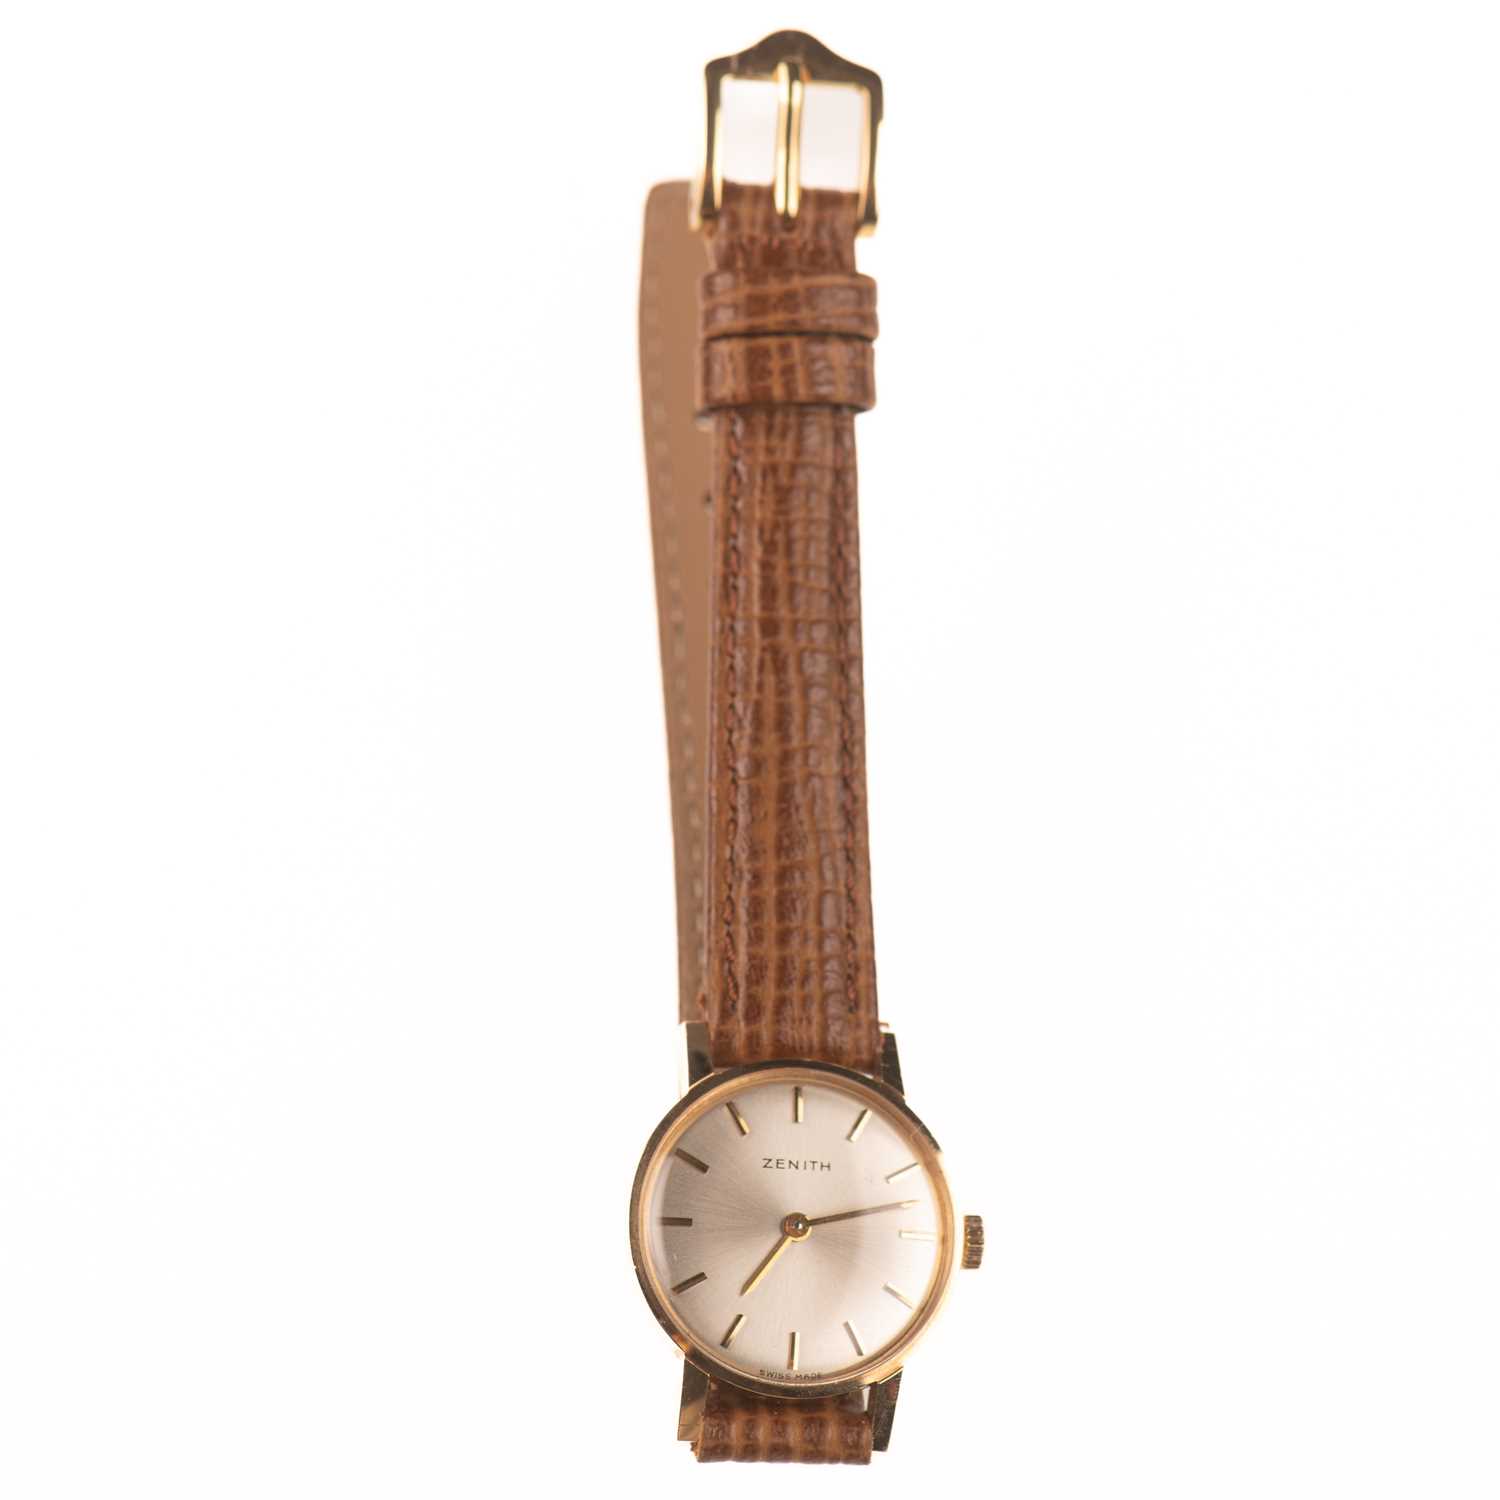 A LADY'S 9CT GOLD ZENITH STRAP WATCH - Image 2 of 2